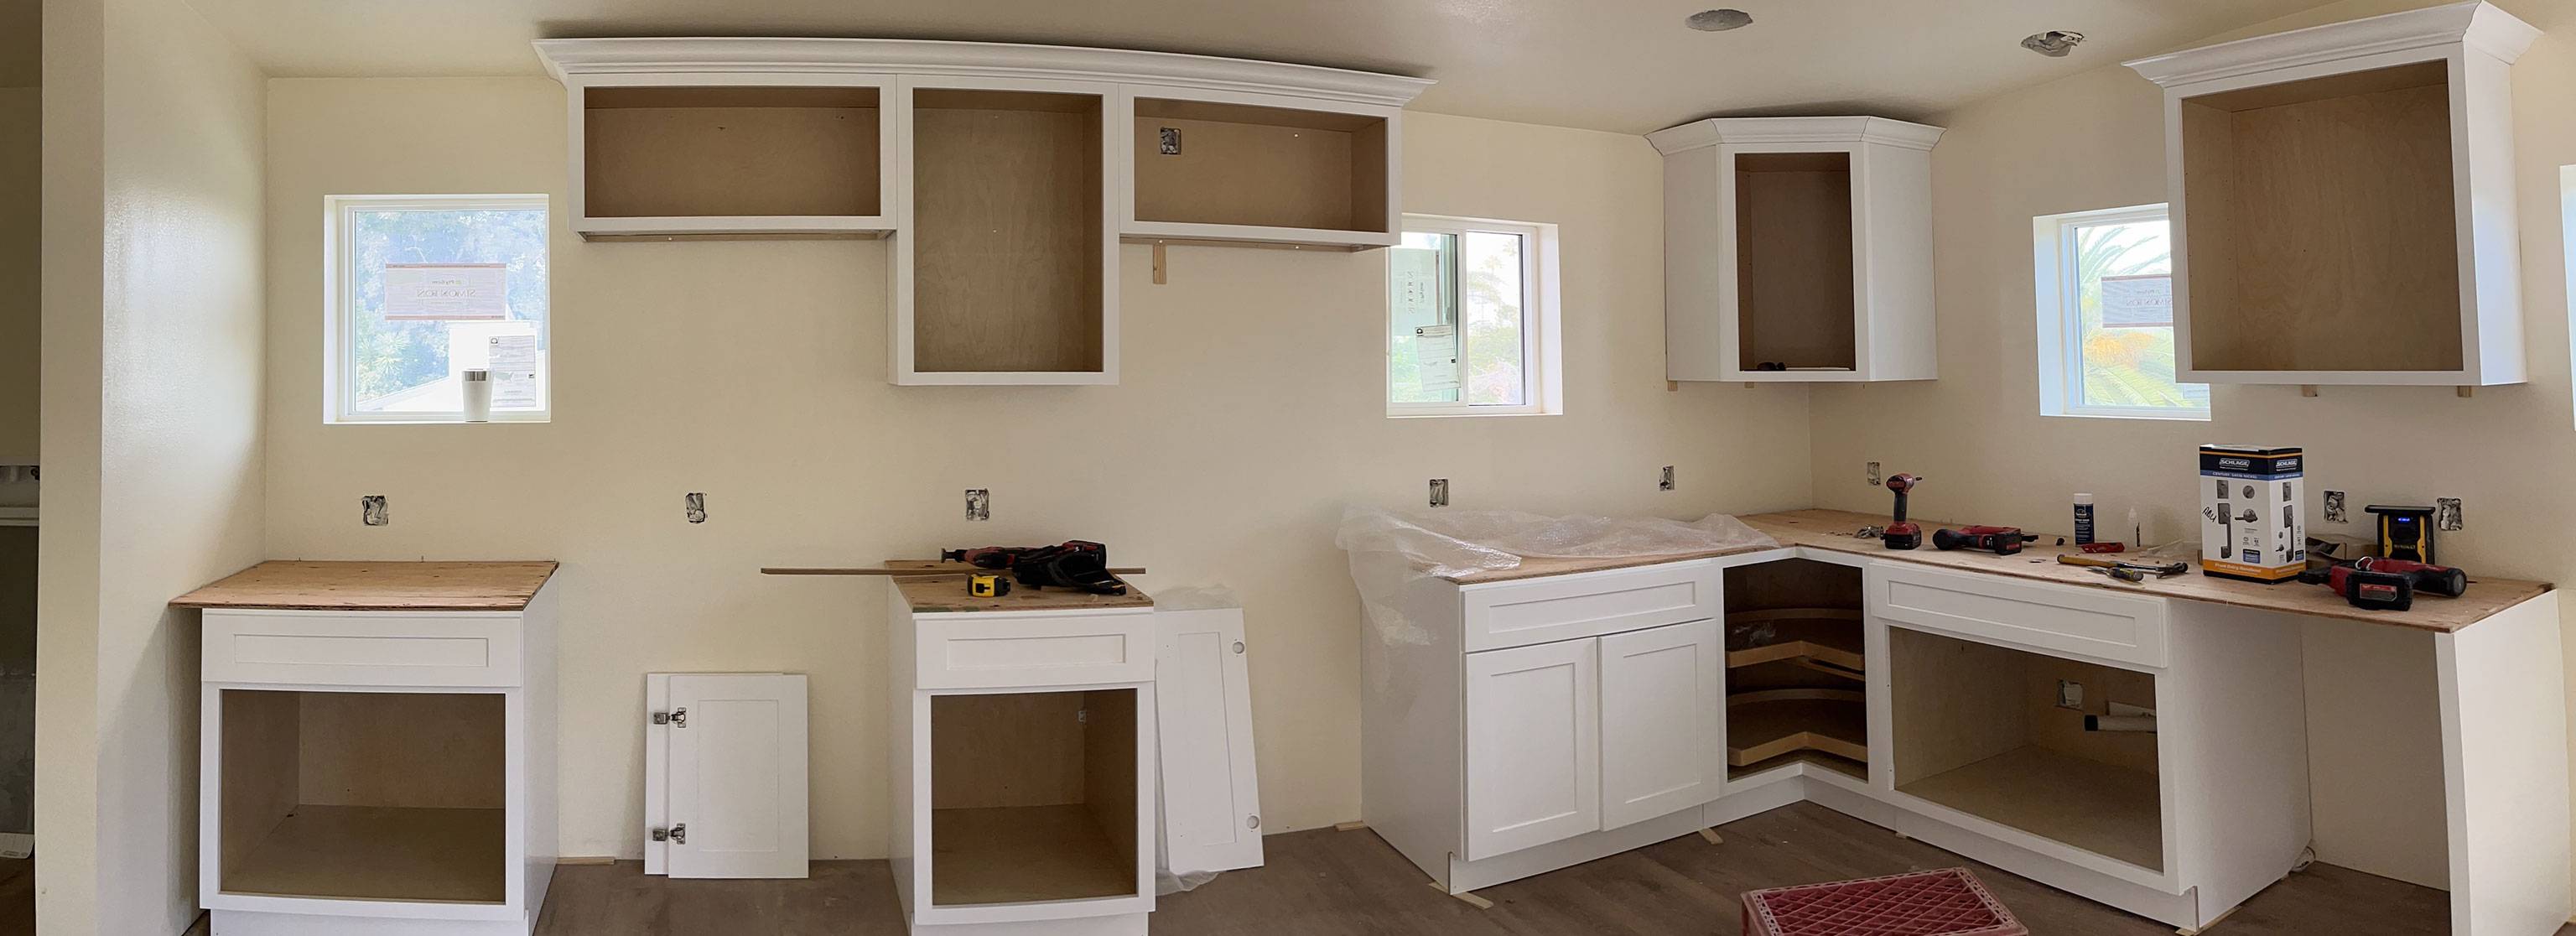 A2M Contractors custom base, wall, and diagonal corner ceiling-height kitchen cabinets